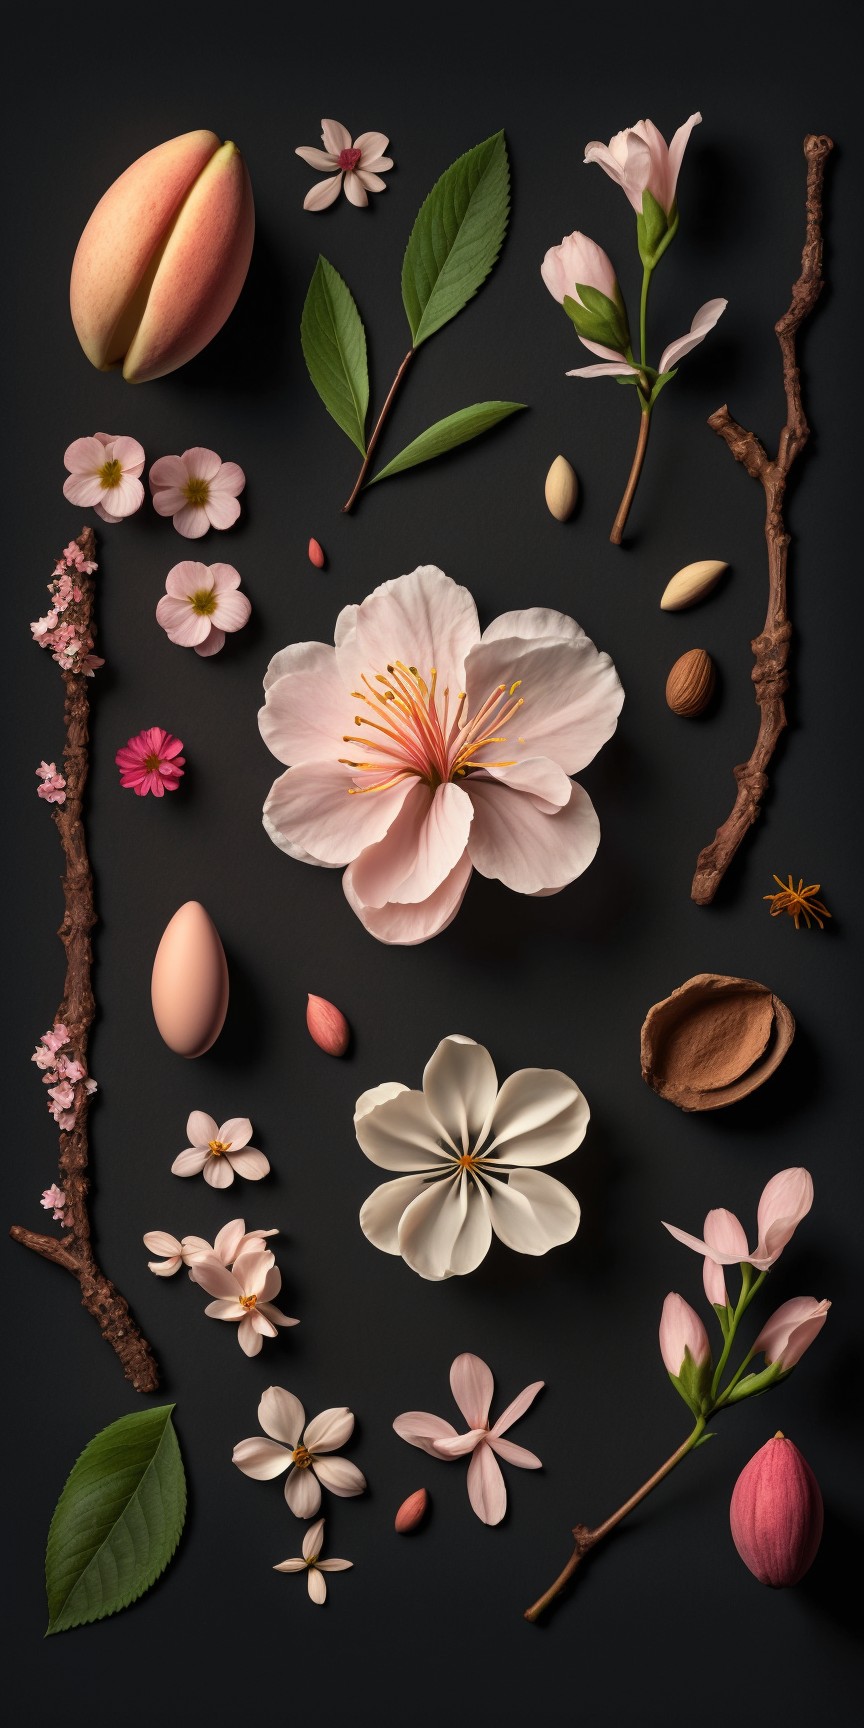 9 images of Blooming Peach Blossom of Super Tidying by Midjourney